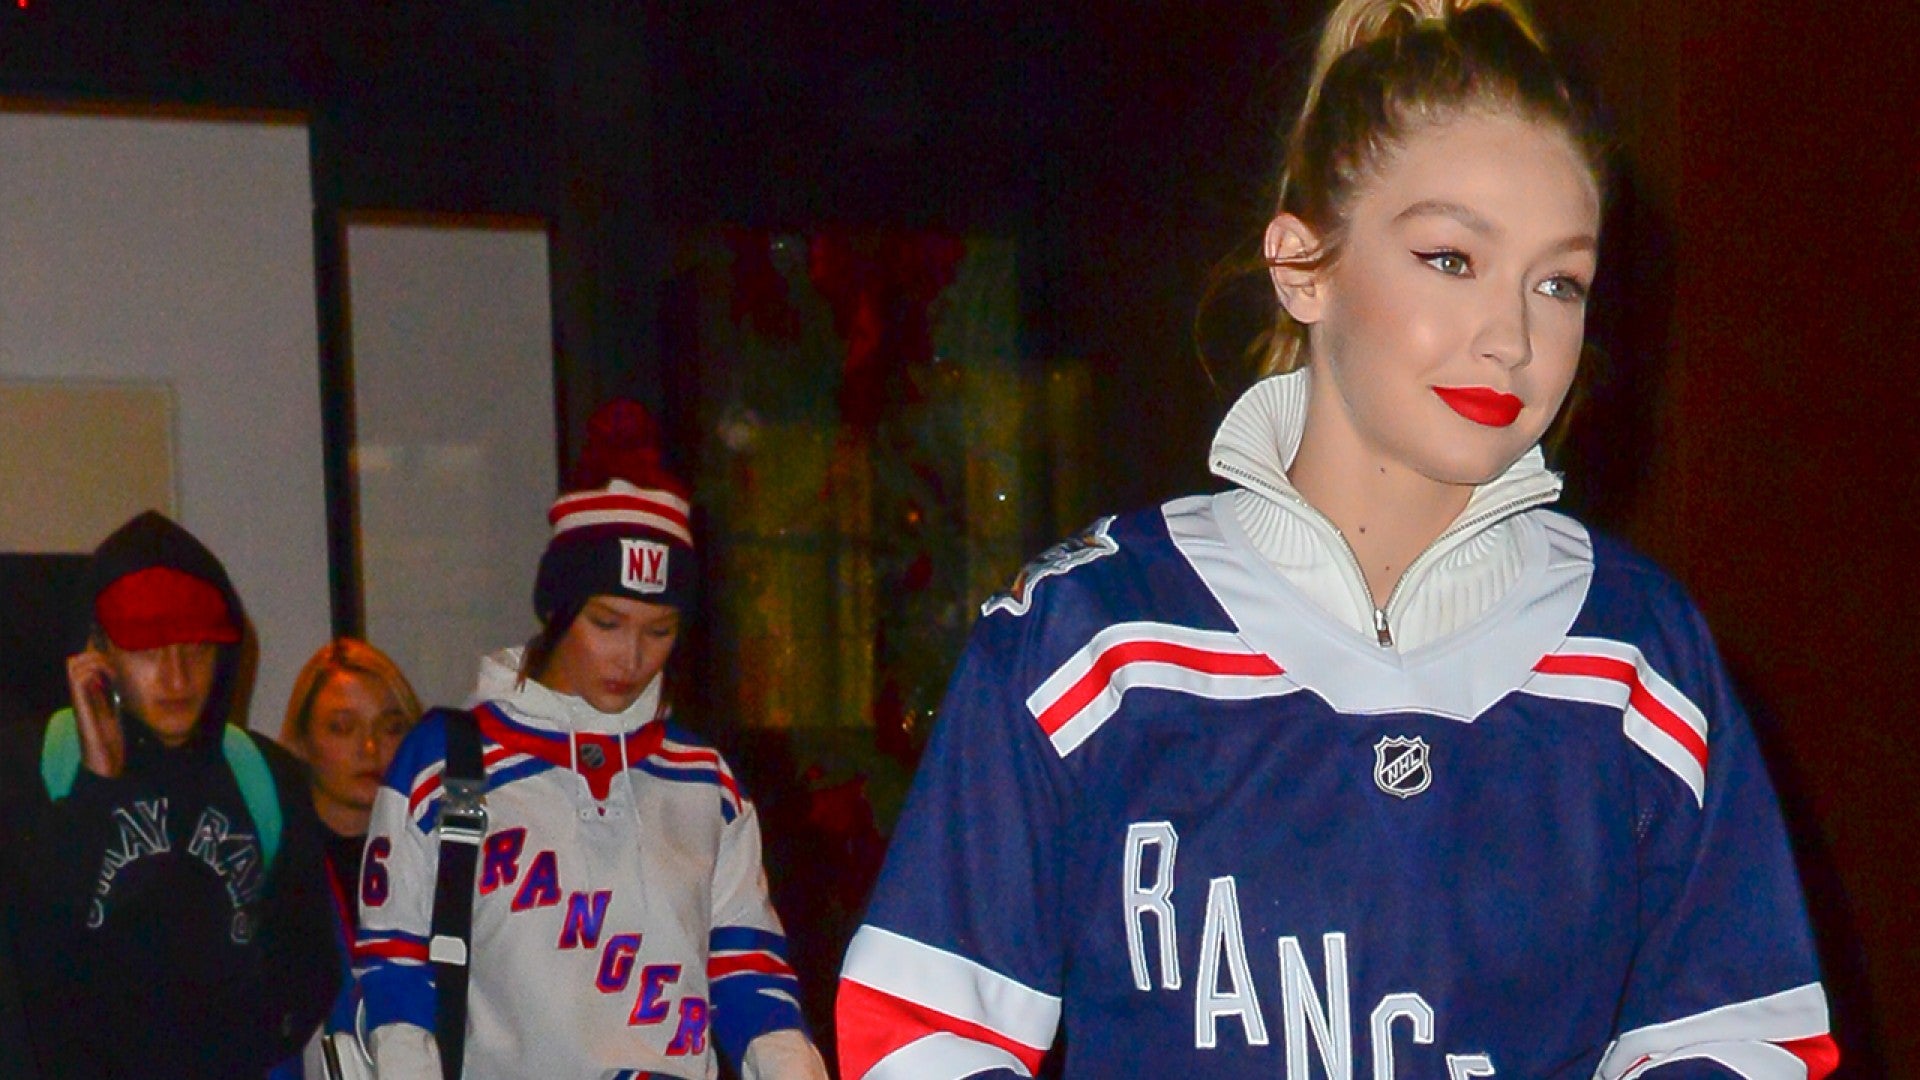 Bella and Gigi Hadid May Have Just Become the Biggest New York Rangers Fans -- See the Fun Pics! Entertainment Tonight